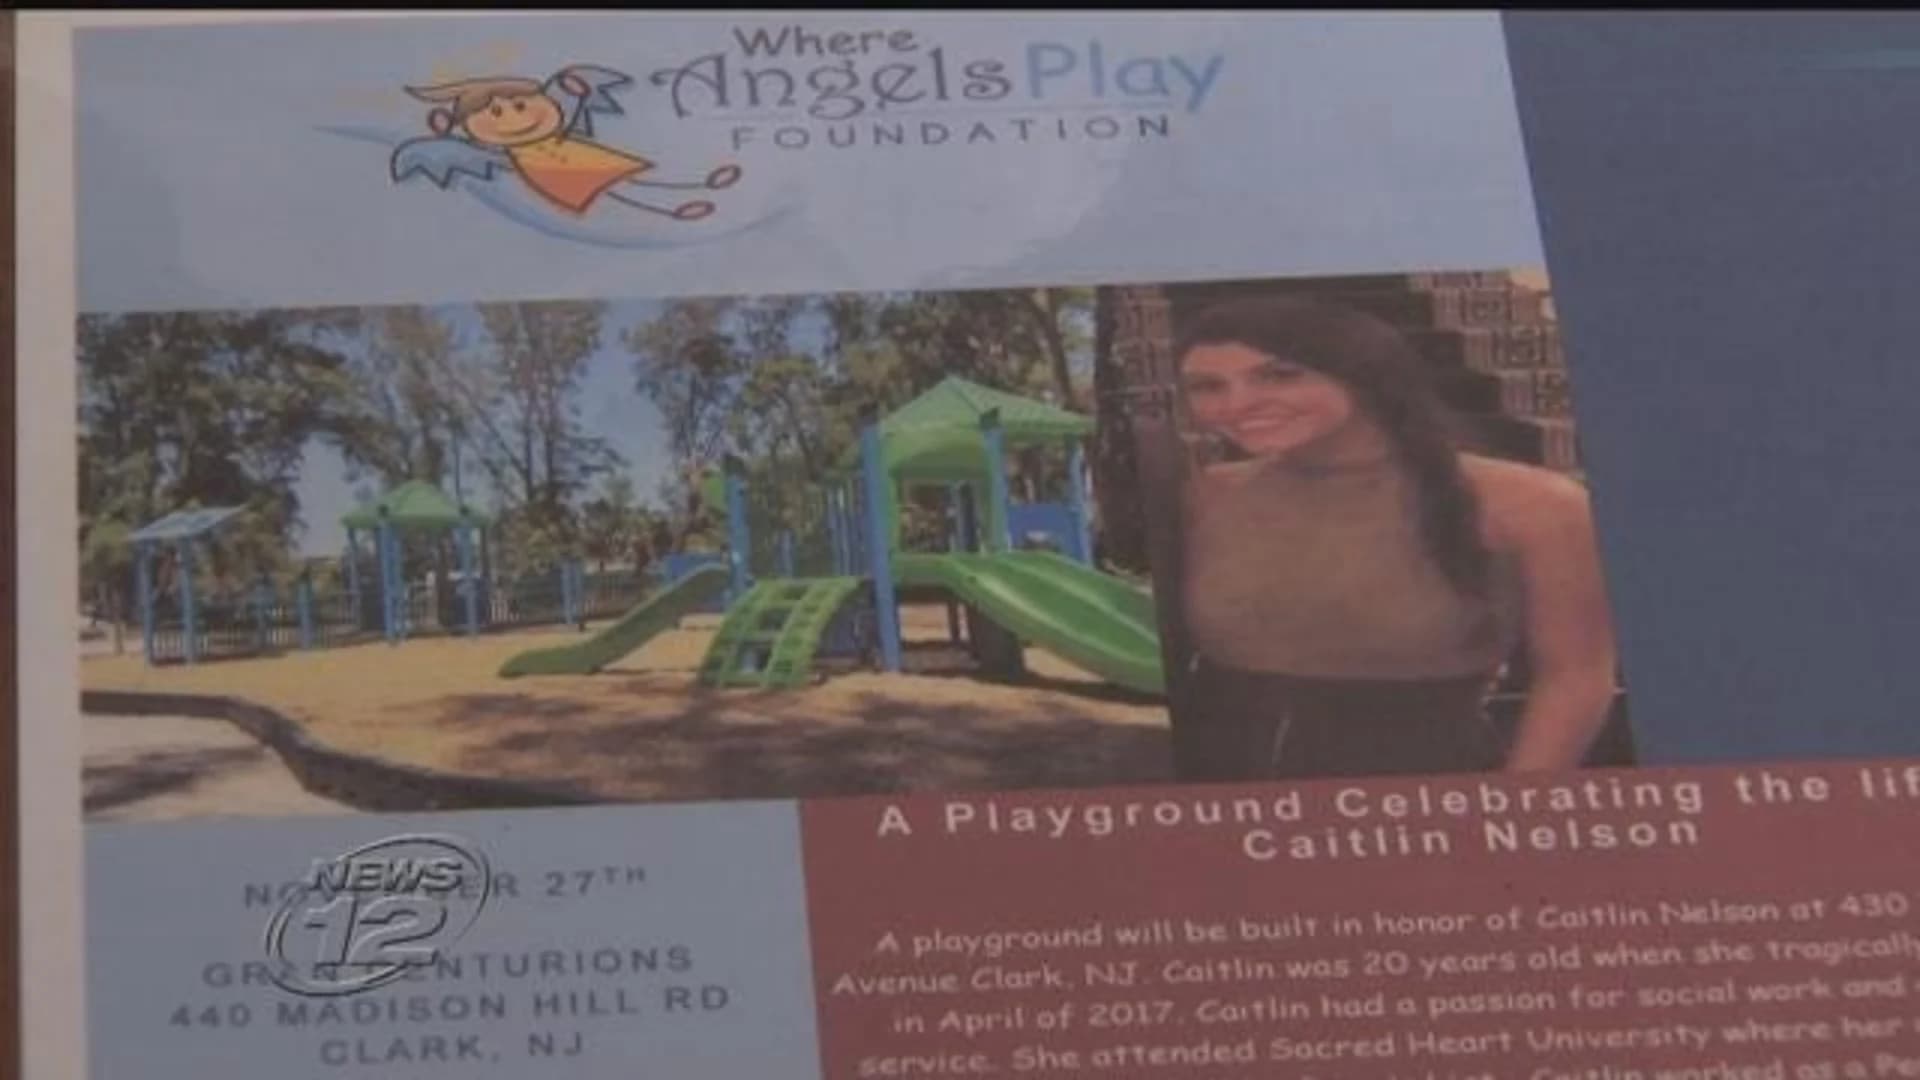 Charity hockey game held to build park to honor woman who died